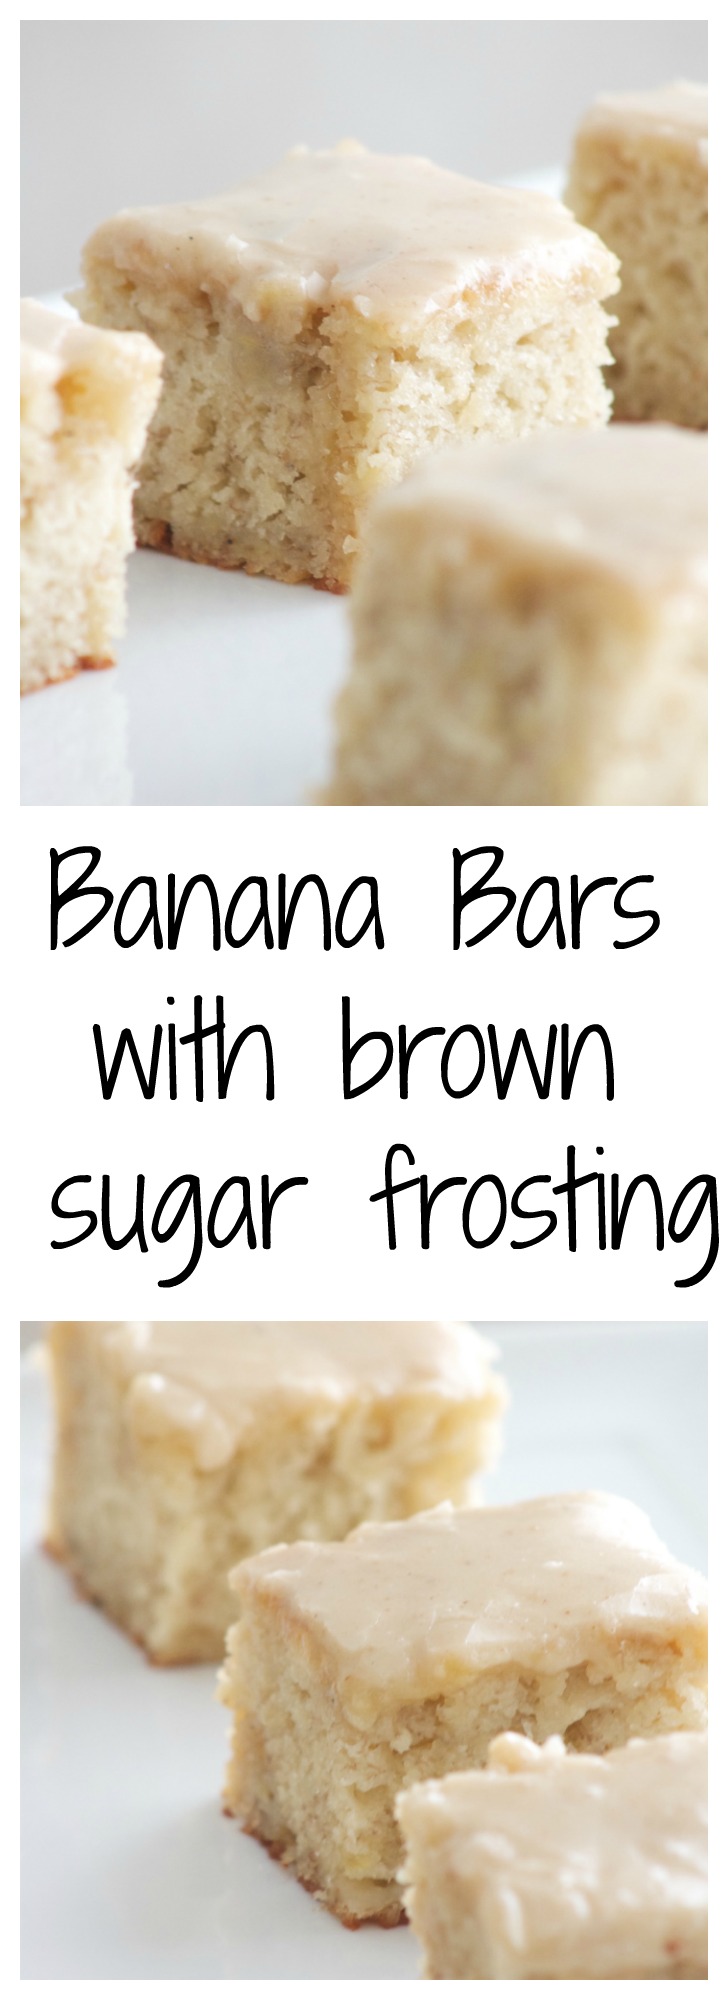 Delicious banana bread bars with brown sugar frosting! - simple and quick banana bars that everyone is going to love! | www.SincerelyJean.com